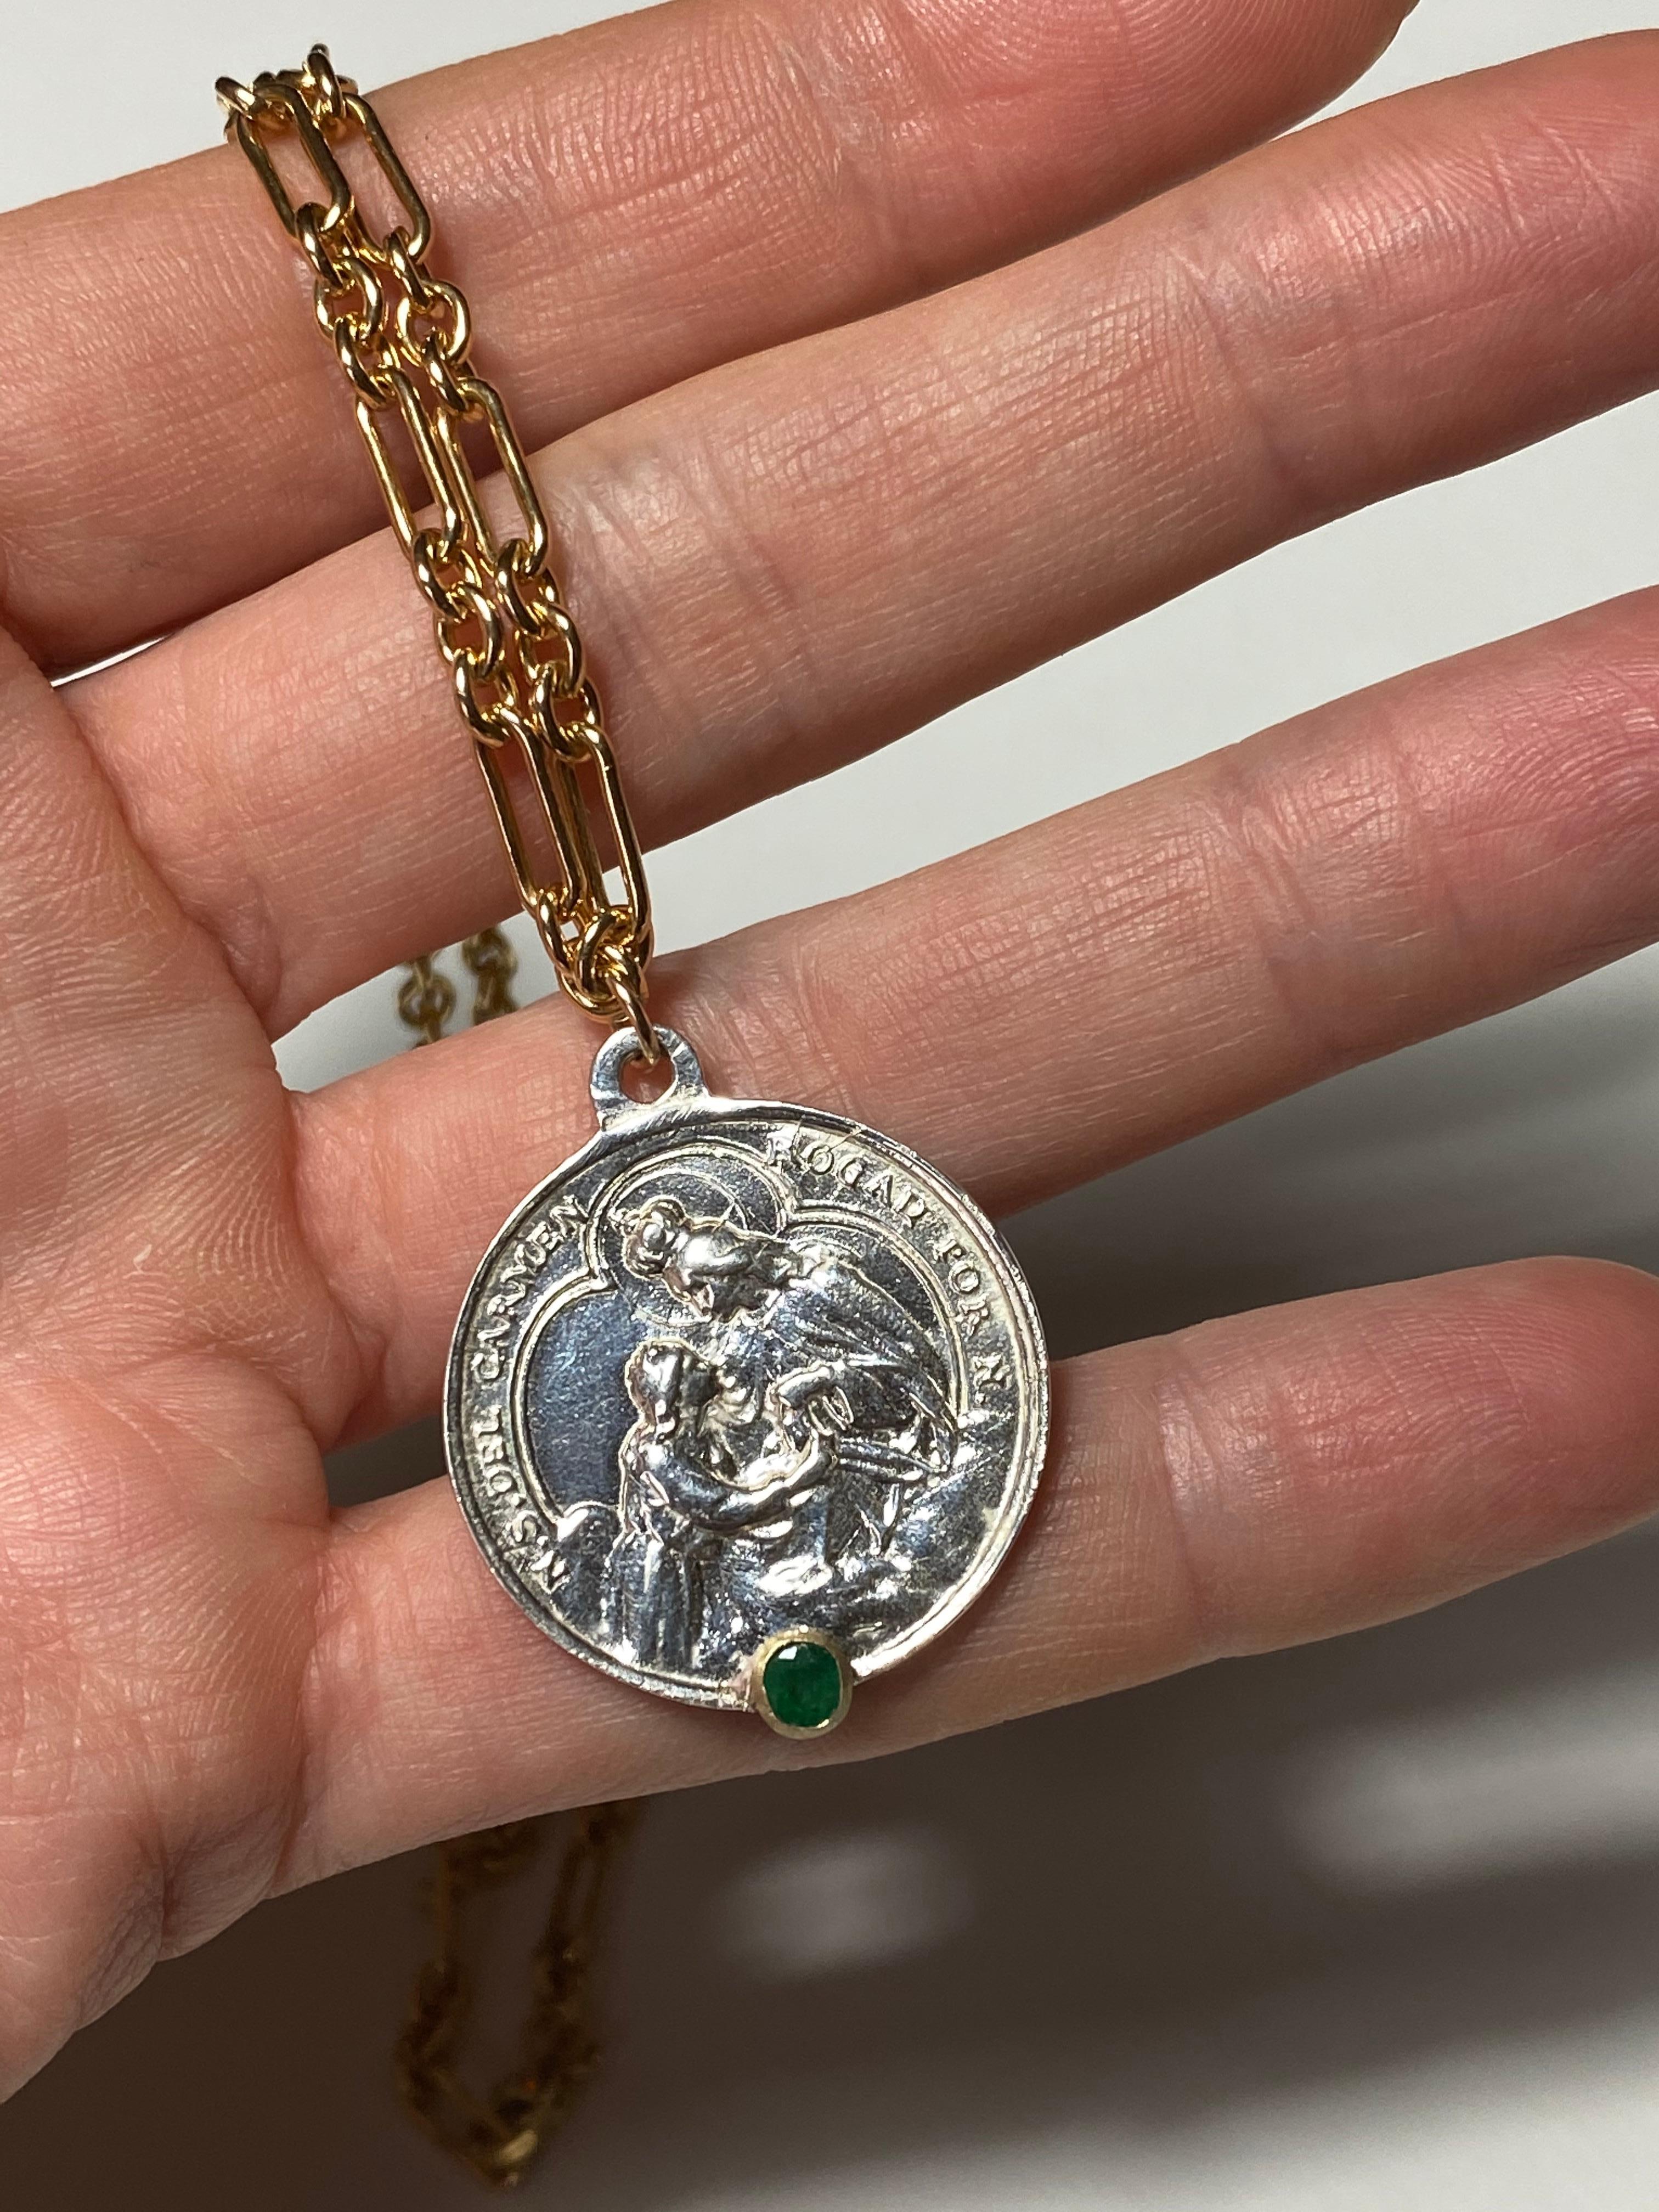 how to make a coin necklace without a hole